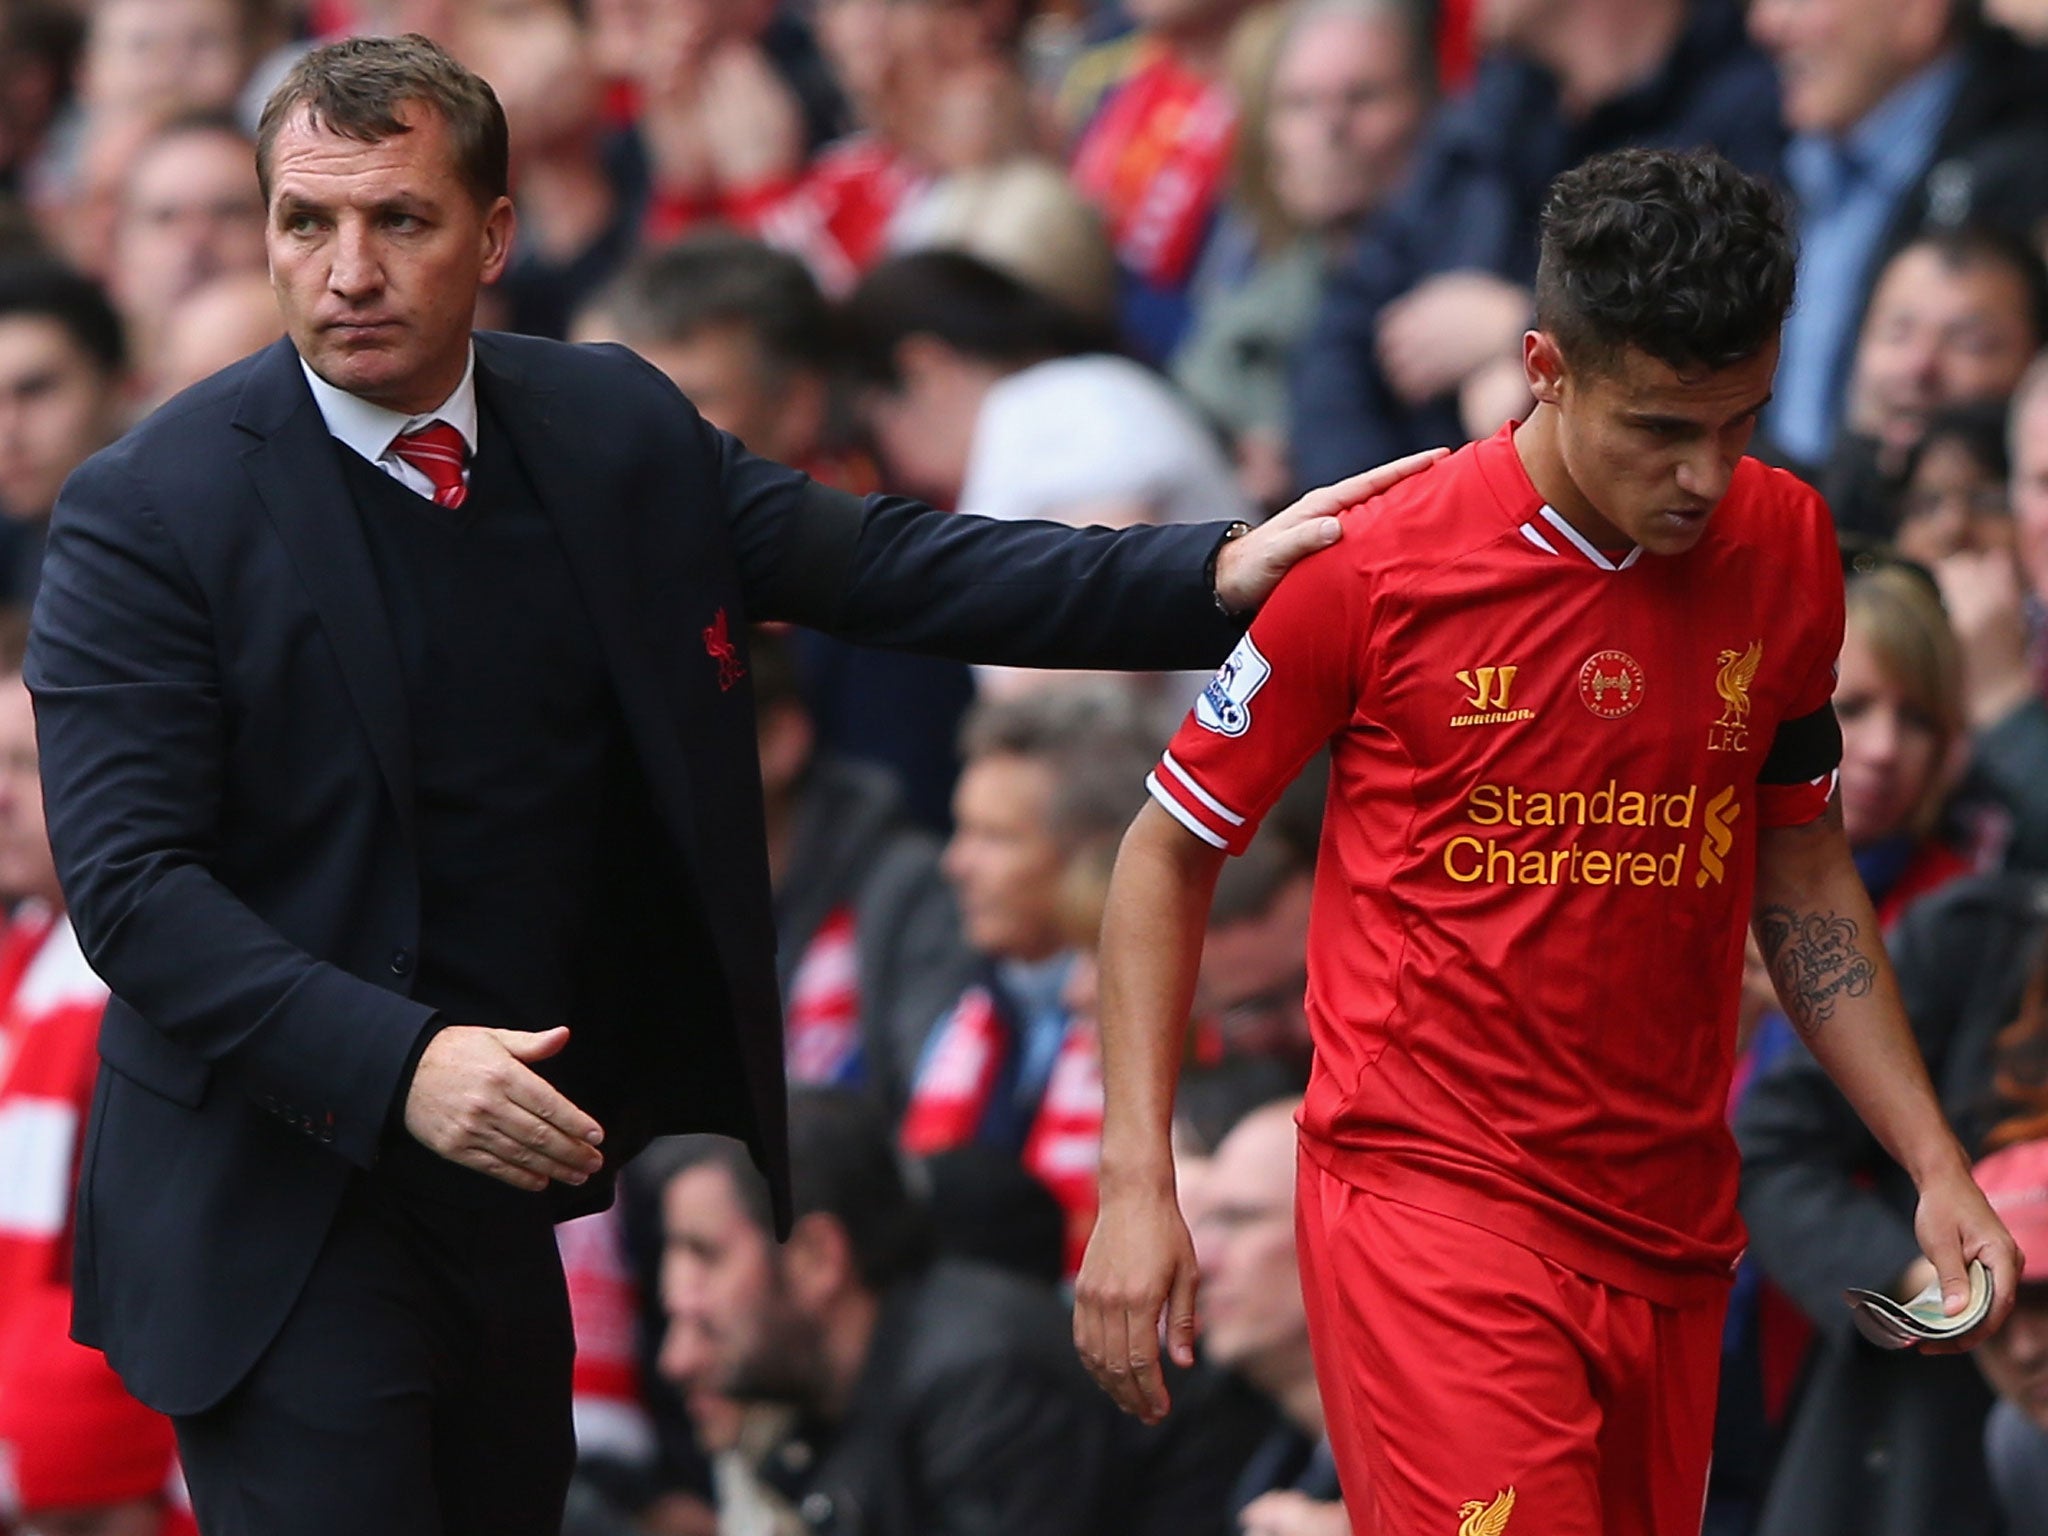 Liverpool Manager Brendan Rodgers (right) congratulates Philippe Coutinho as he is substituted